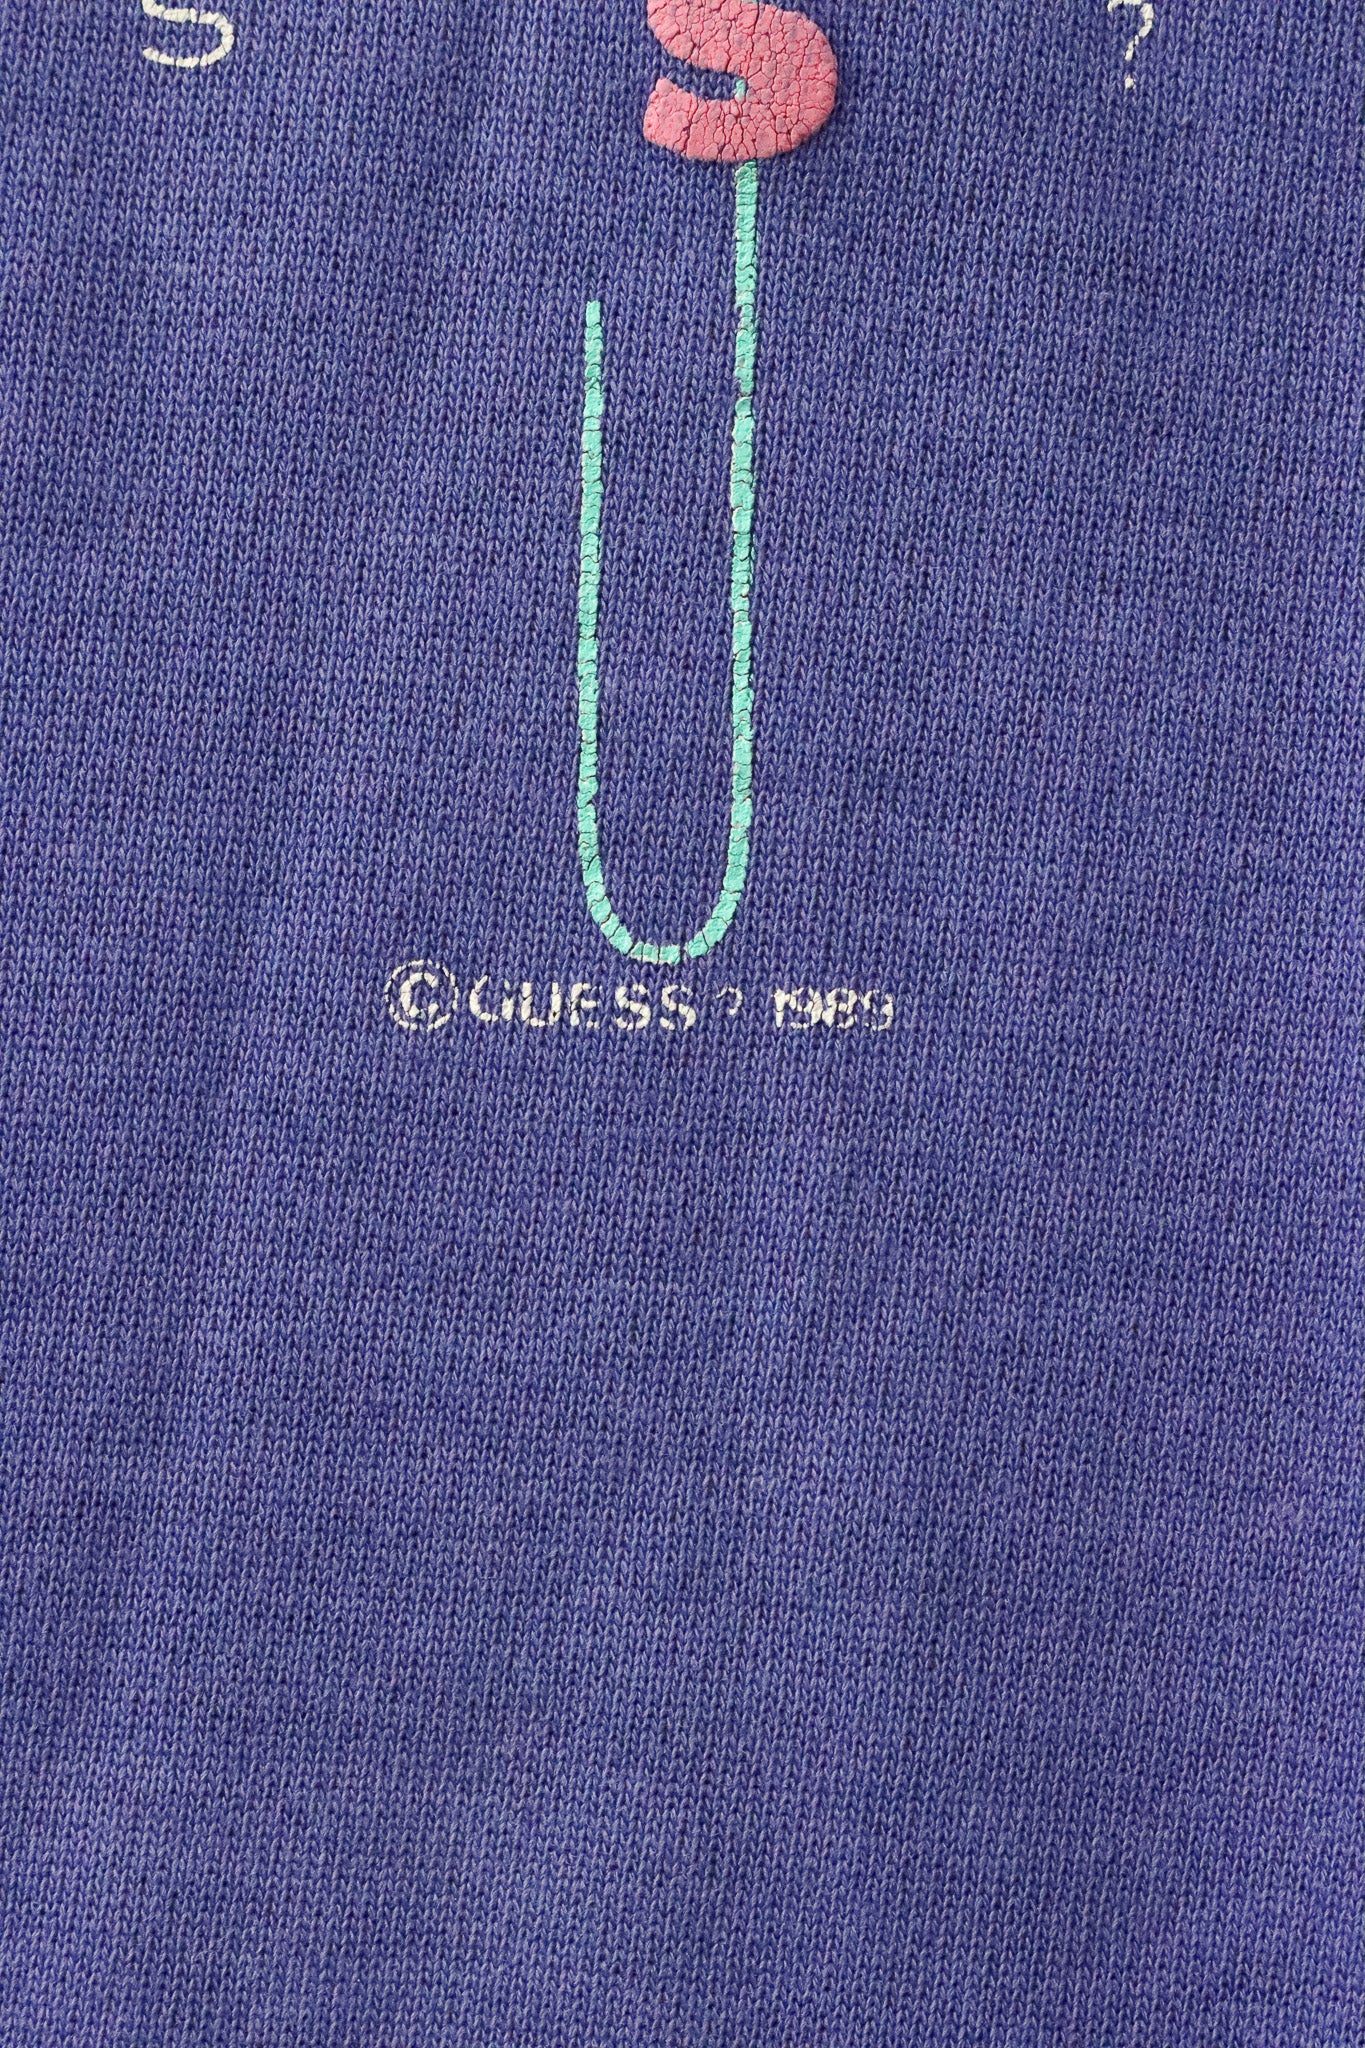 Vintage Guess USA Sweater Small